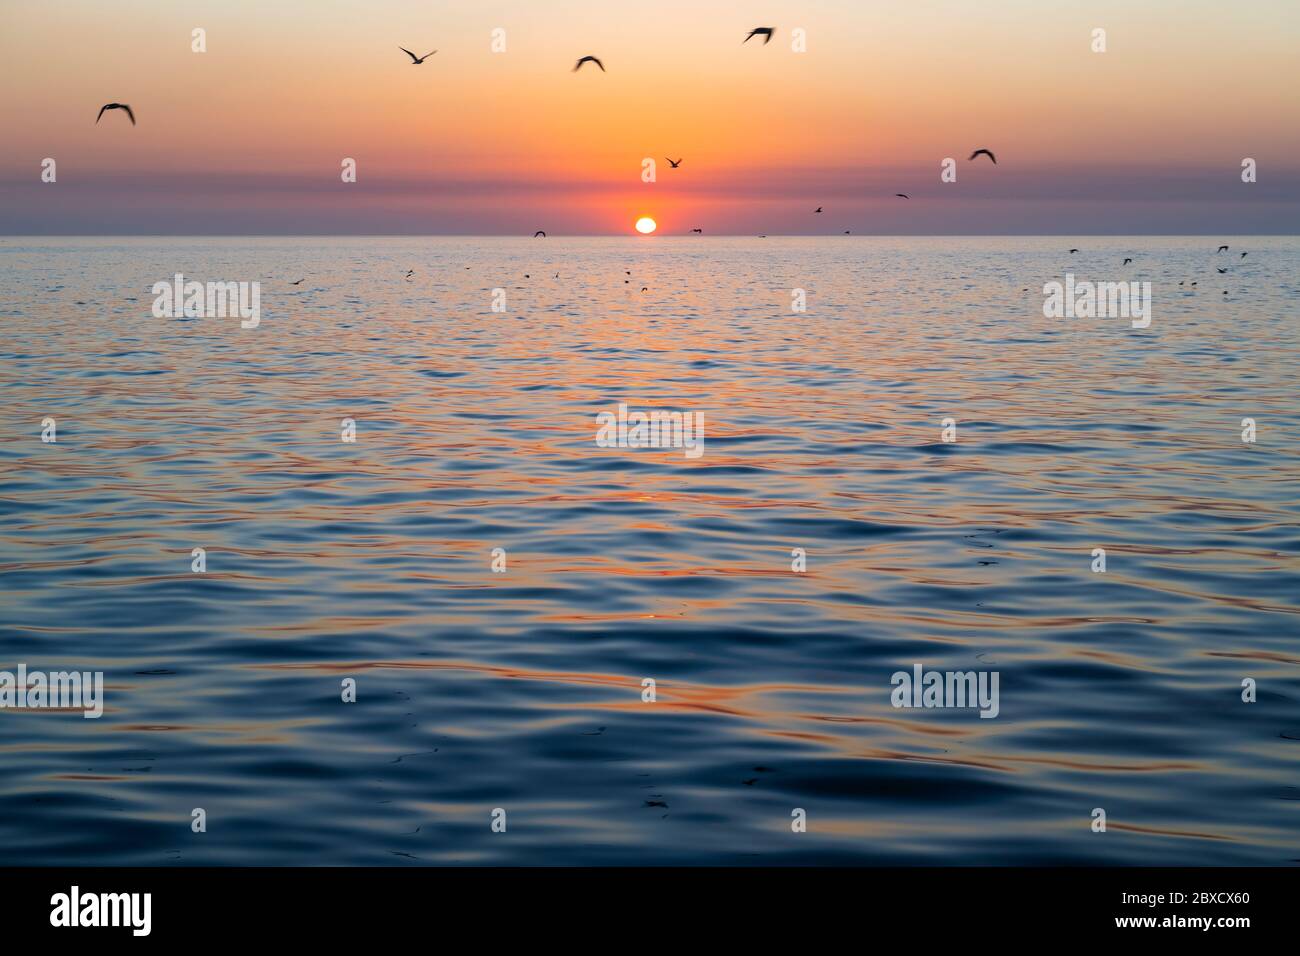 Majestic sunset with overflying seagulls in blur motion by the Gulf of Mexico, Campeche City, Yucatan, Mexico. Stock Photo